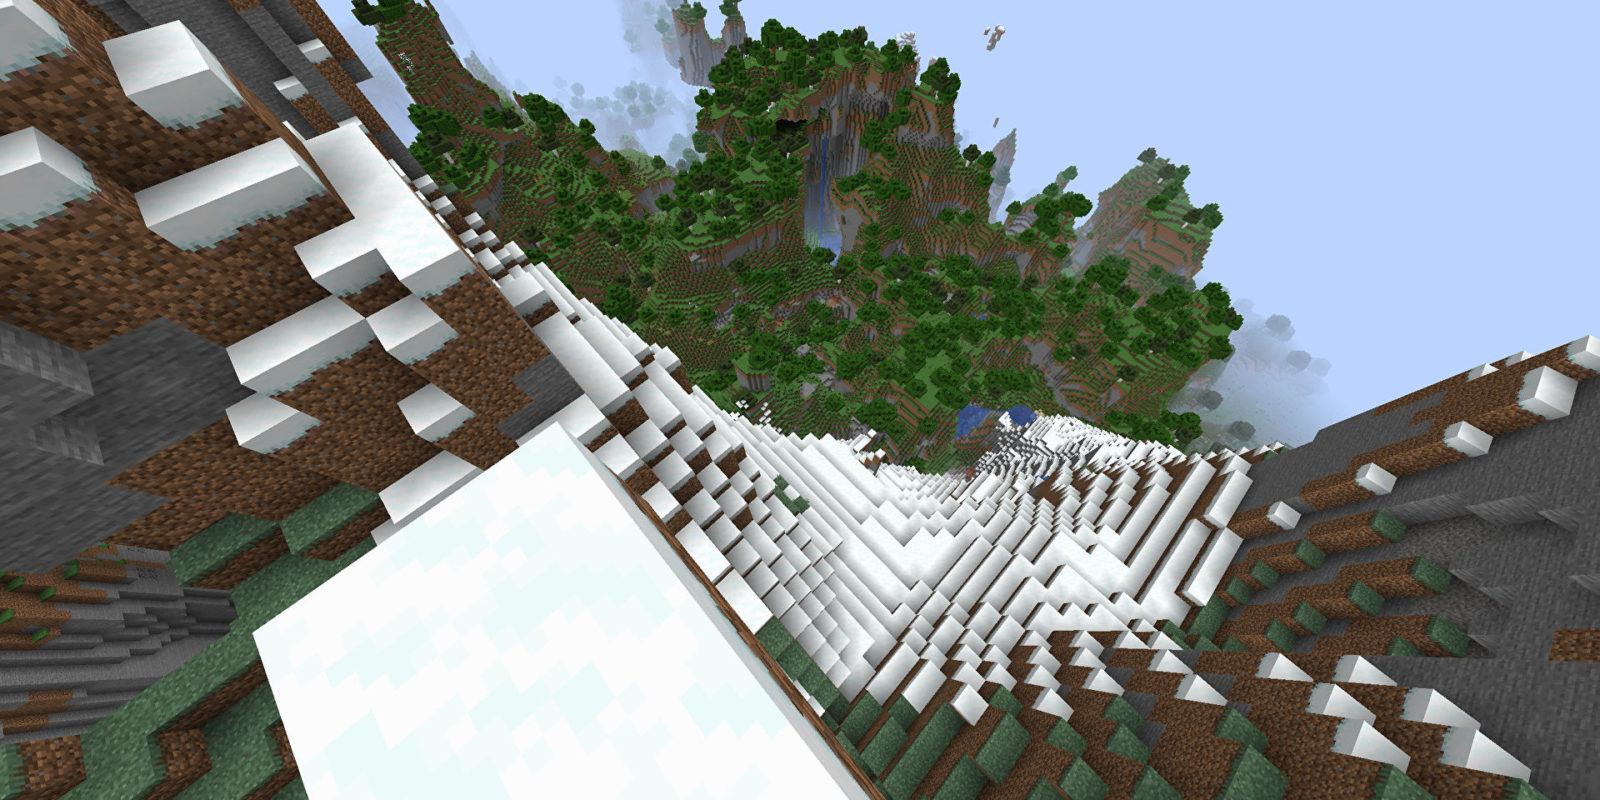 Minecraft 1.18’s new world generation is now available for